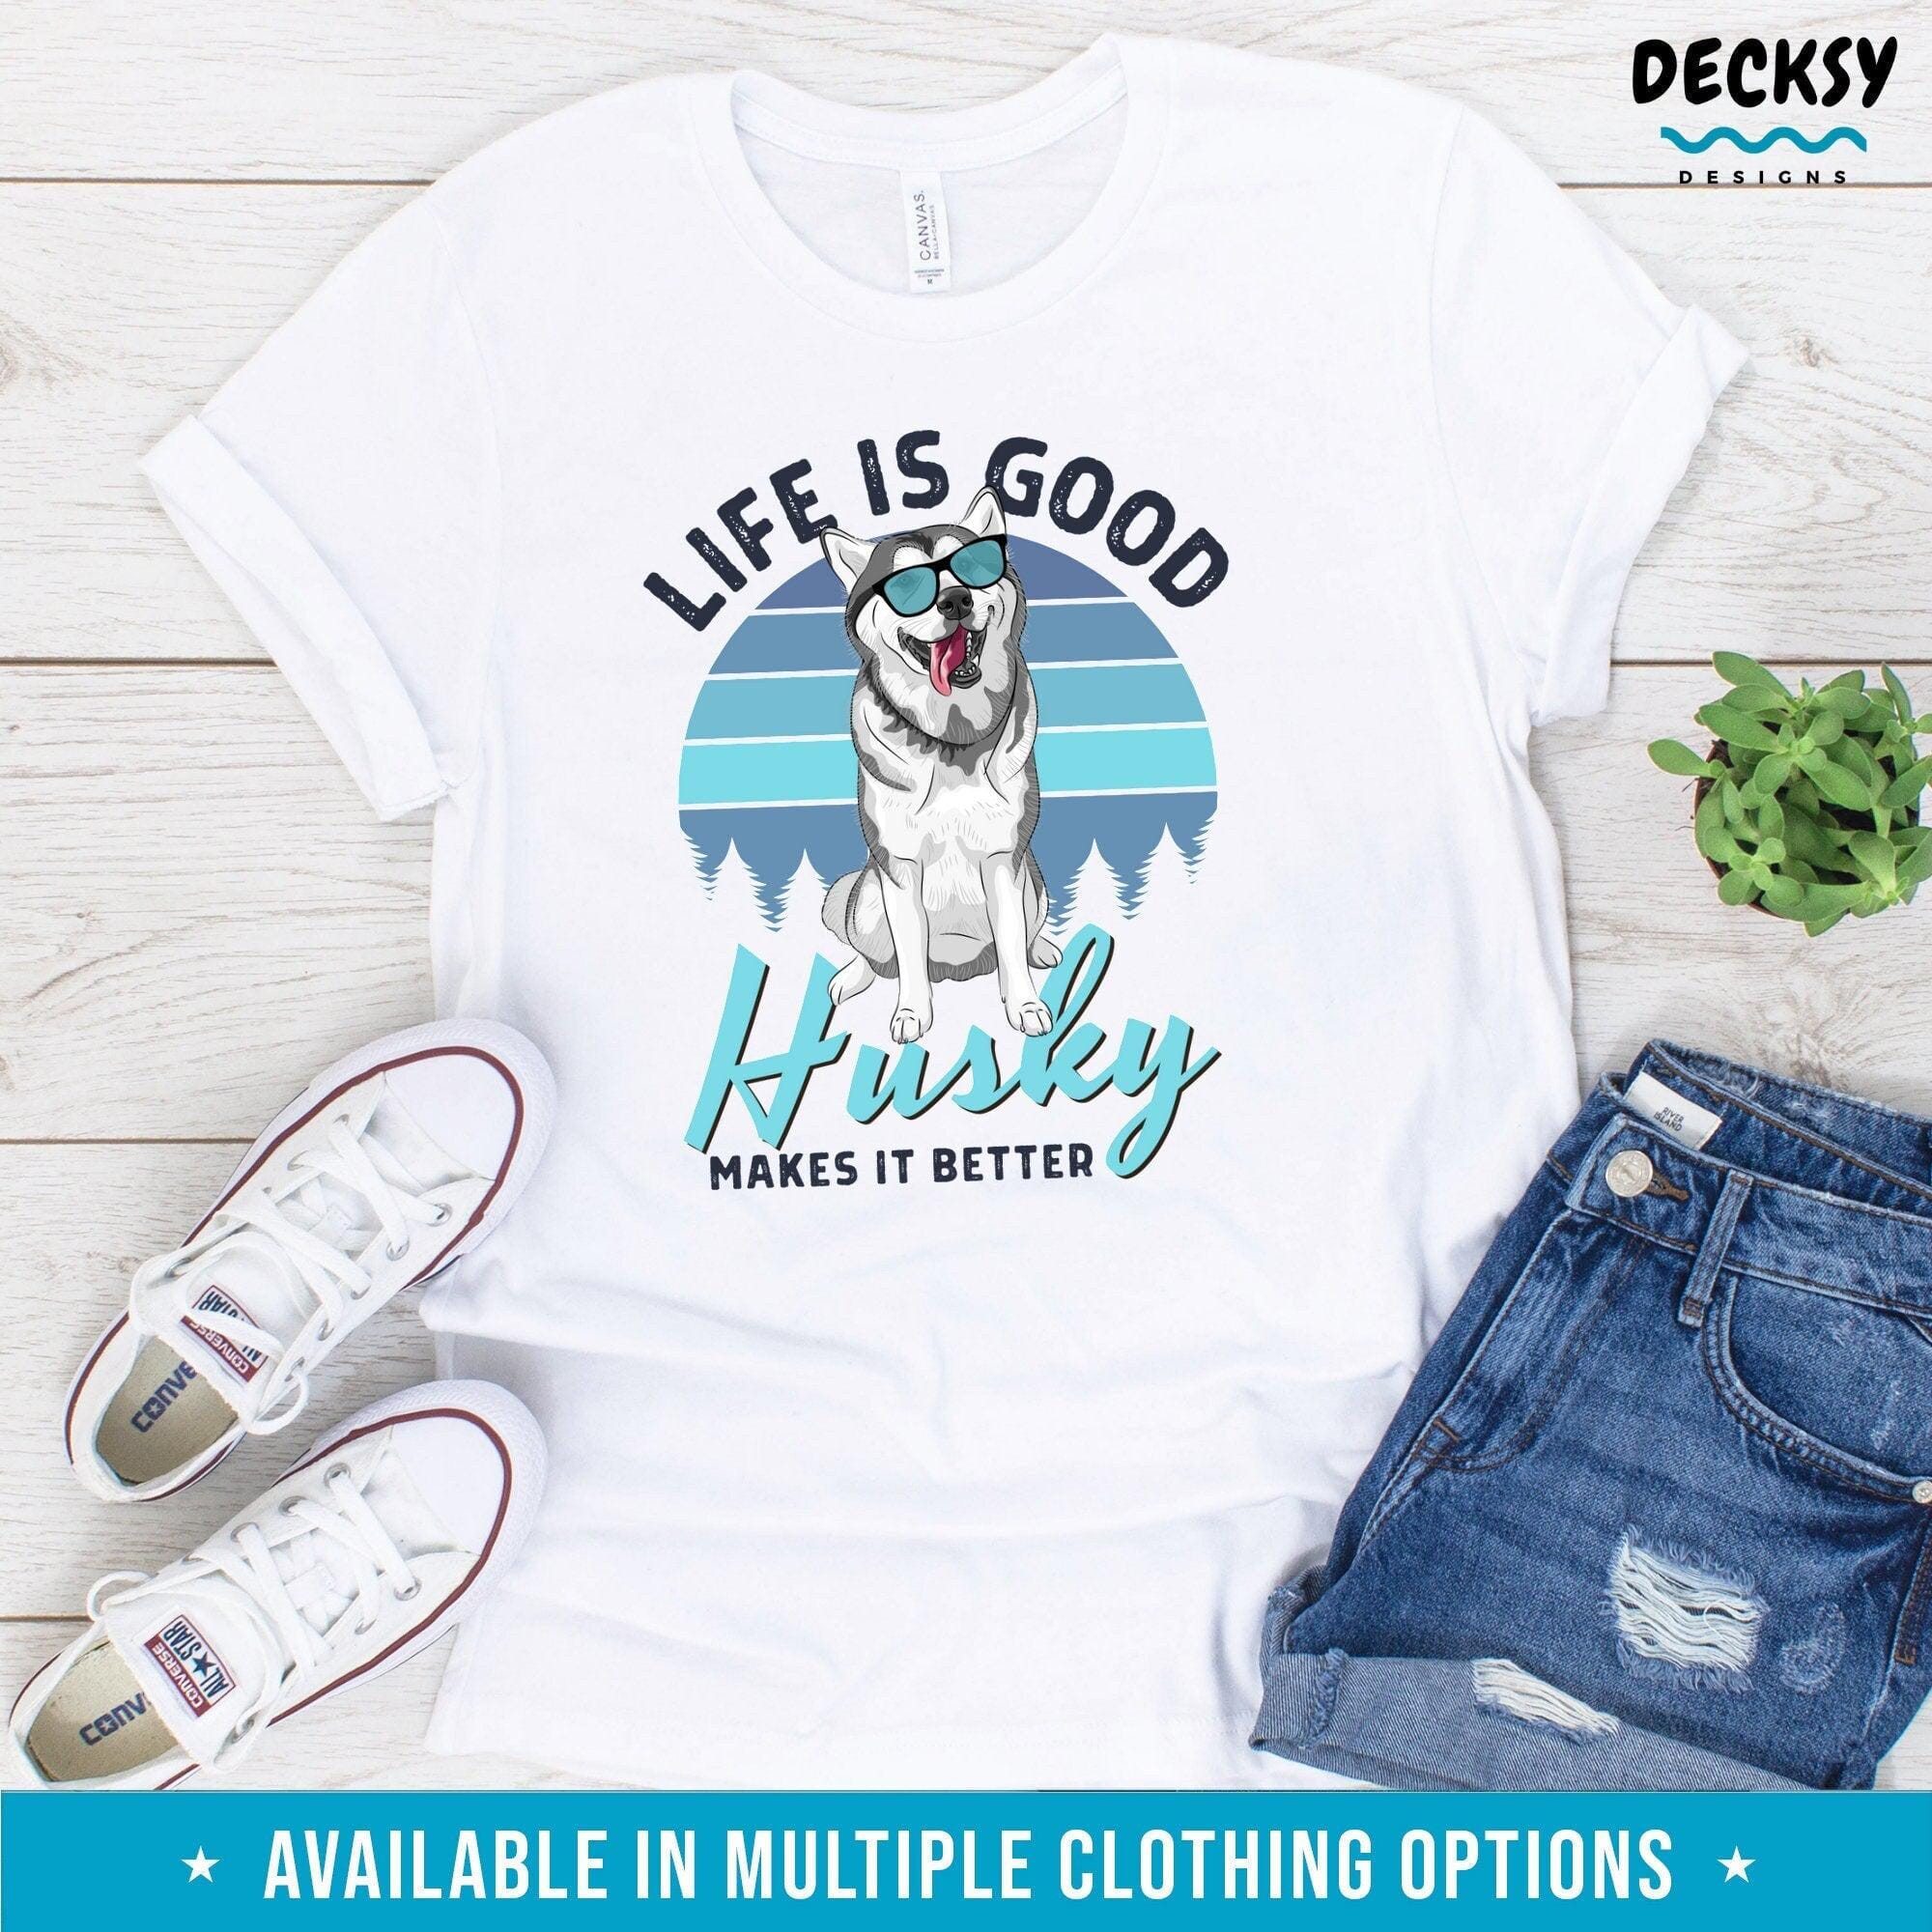 Husky T Shirt, Gift for Siberian Husky Owner-Clothing:Gender-Neutral Adult Clothing:Tops & Tees:T-shirts:Graphic Tees-DecksyDesigns